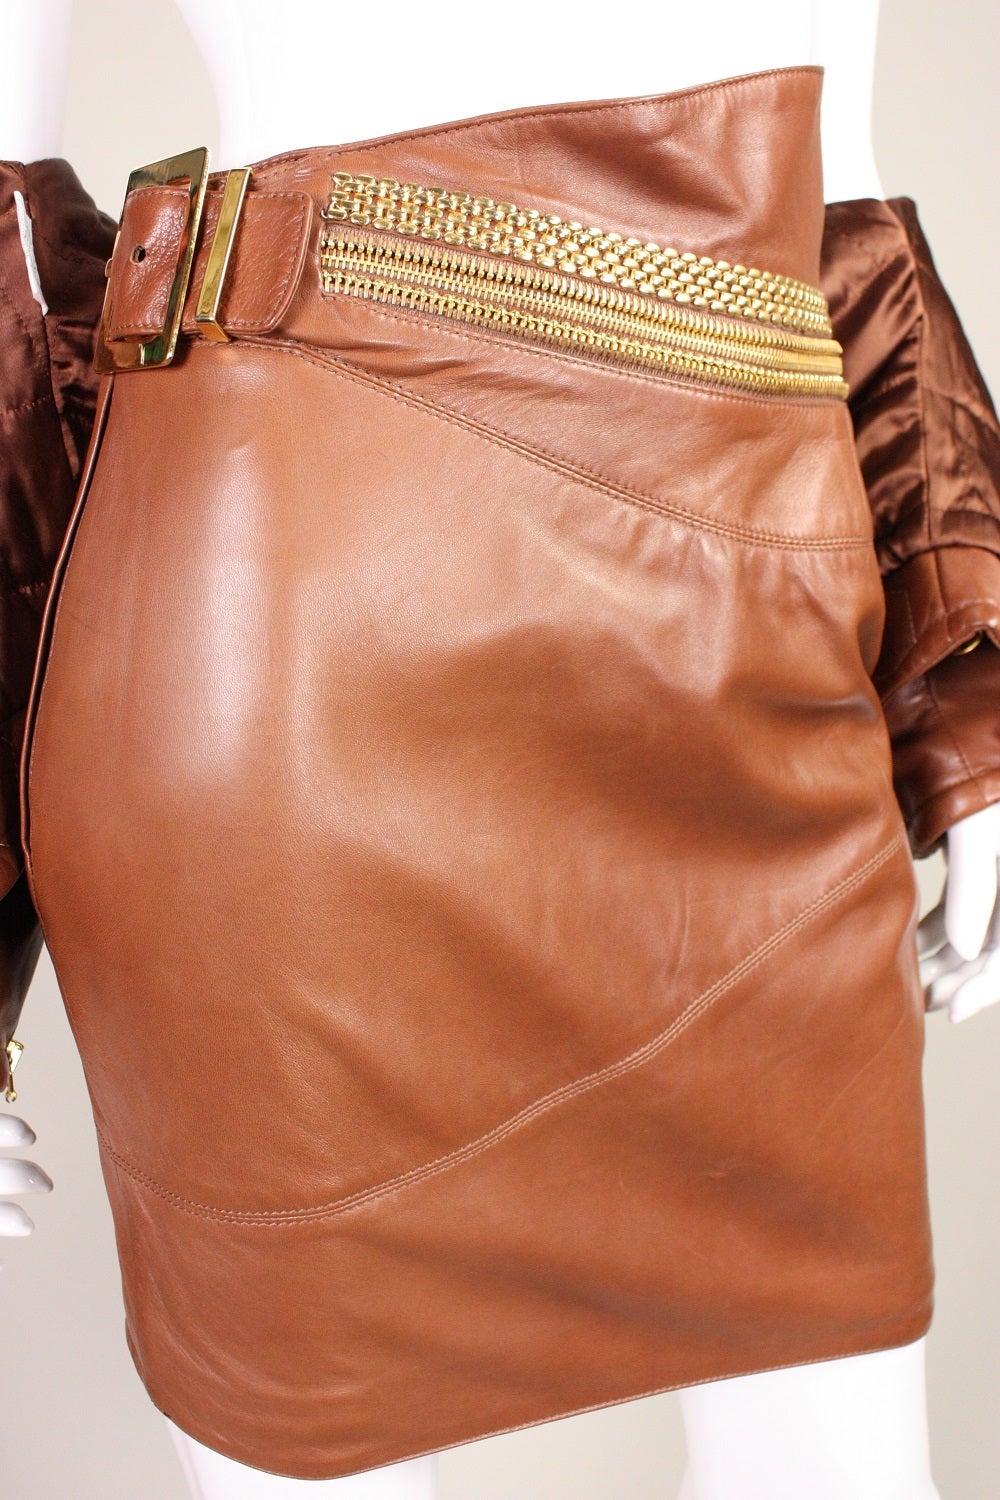 Gianfranco Ferre Leather Suit with Hardware Detail For Sale 4